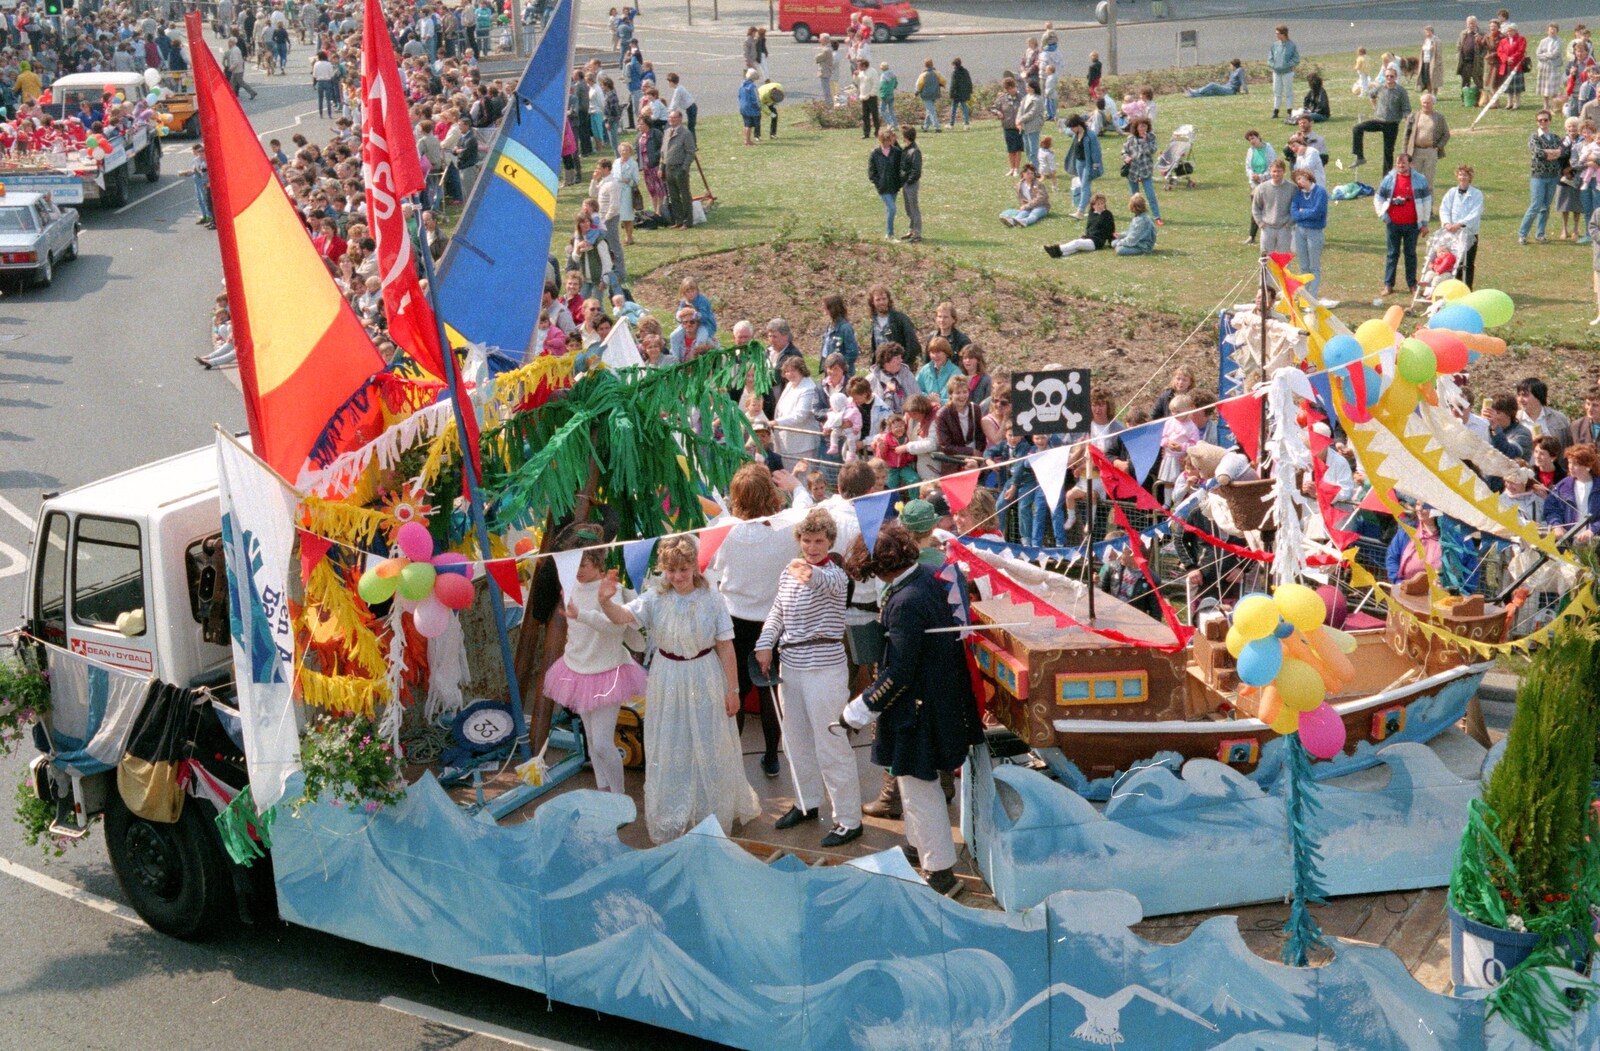 A desert island float from Chantal and Andy's Wedding, and the Lord Mayor's Parade, Plymouth - 20th May 1987